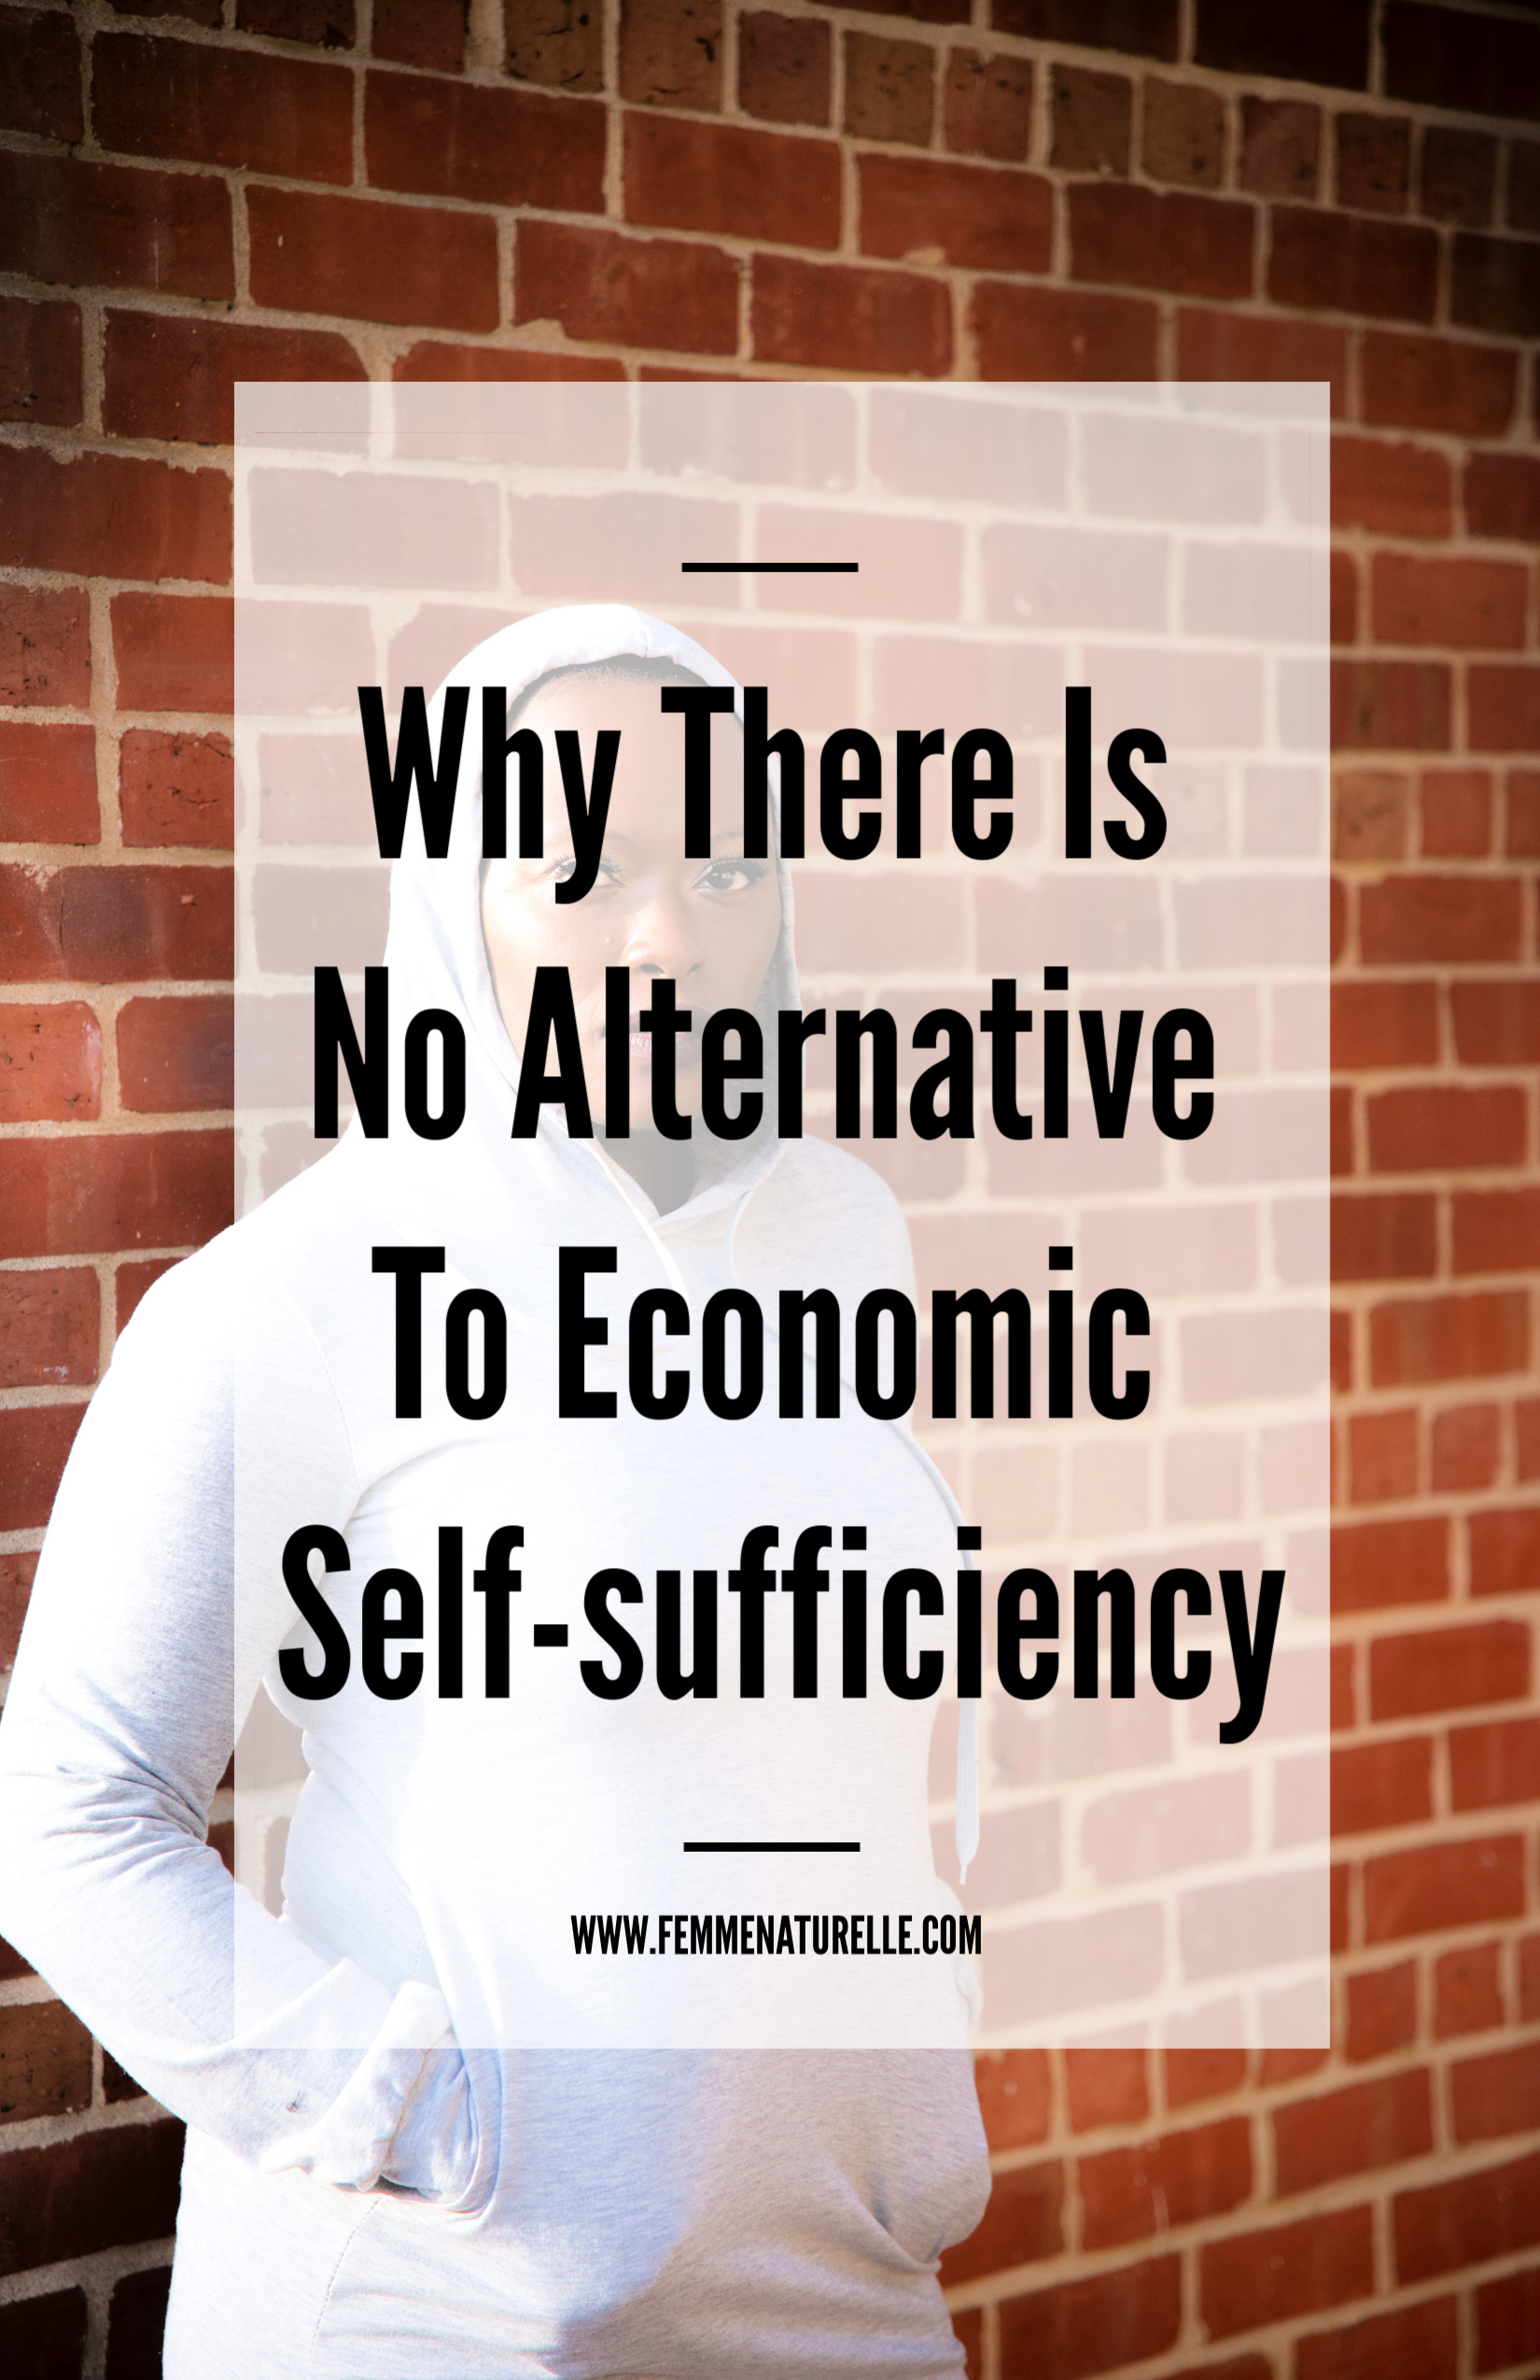 Why There Is No Alternative To Economic Self-sufficiency